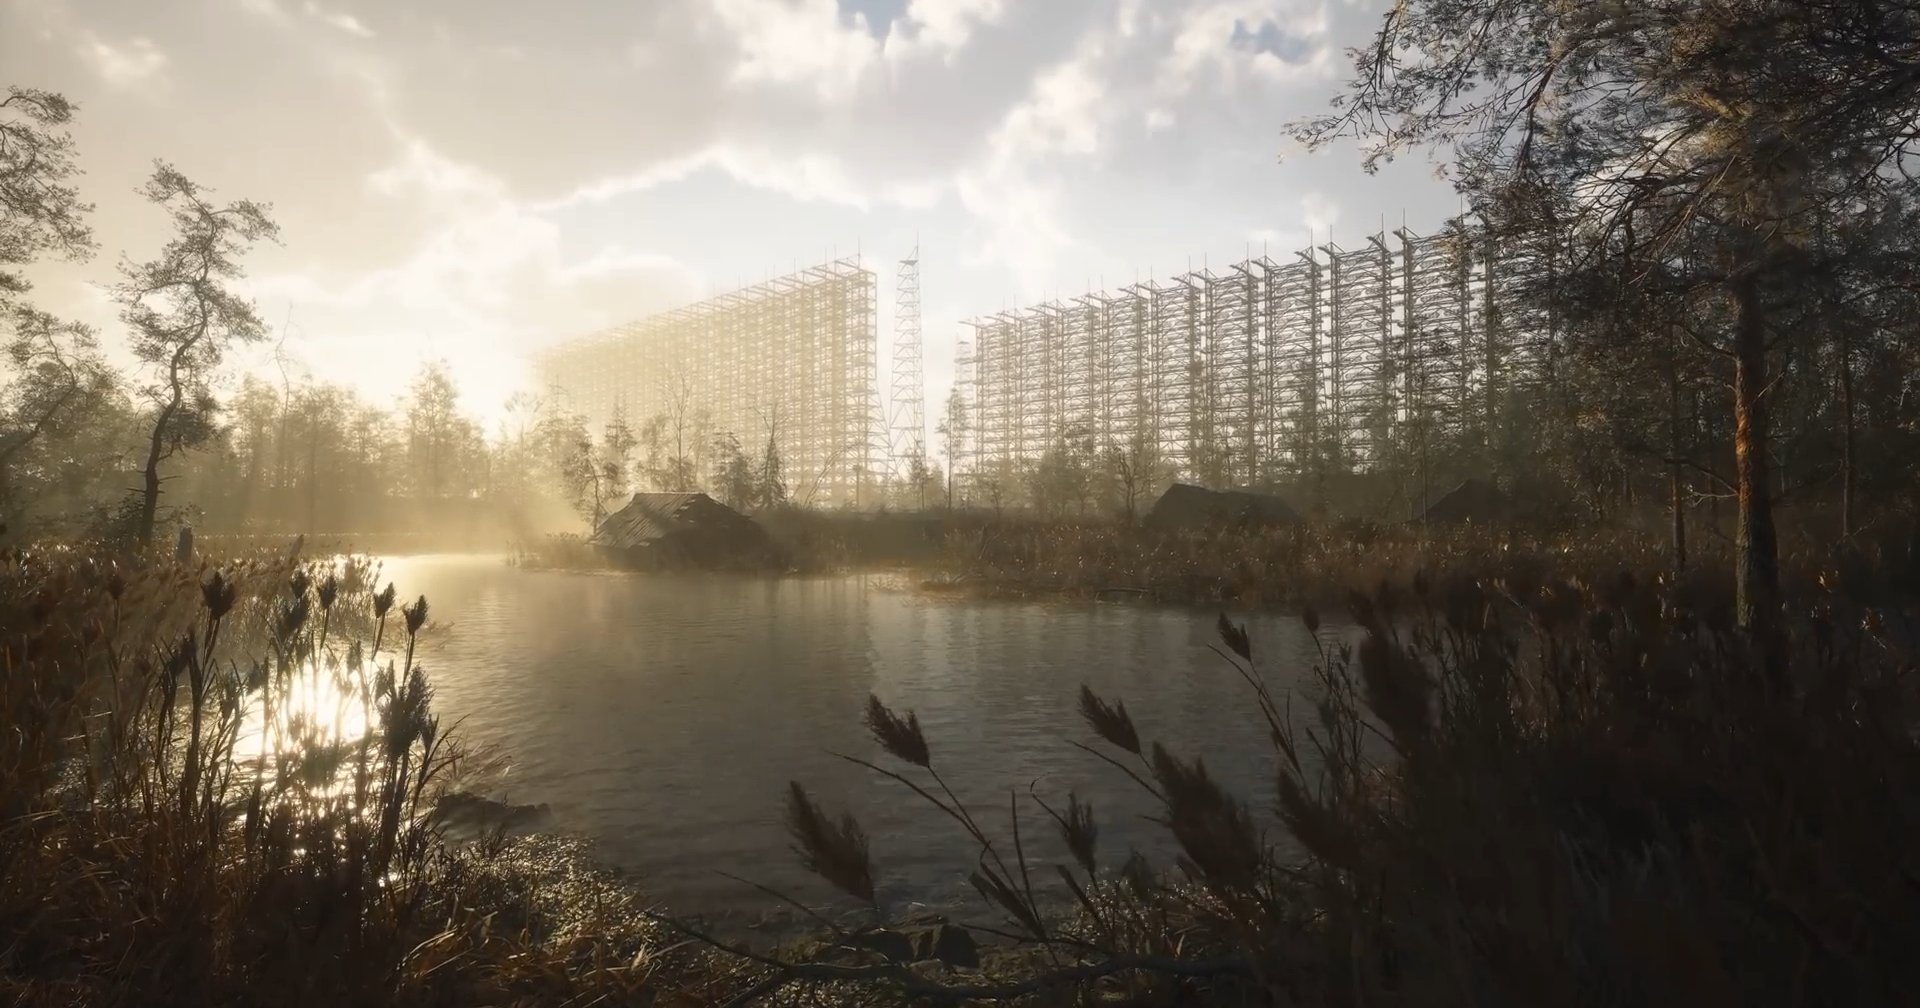 We look at a vast radar station in a gloomy terrain in Stalker 2, one of the new survival games 2023 in Unreal Engine 5.